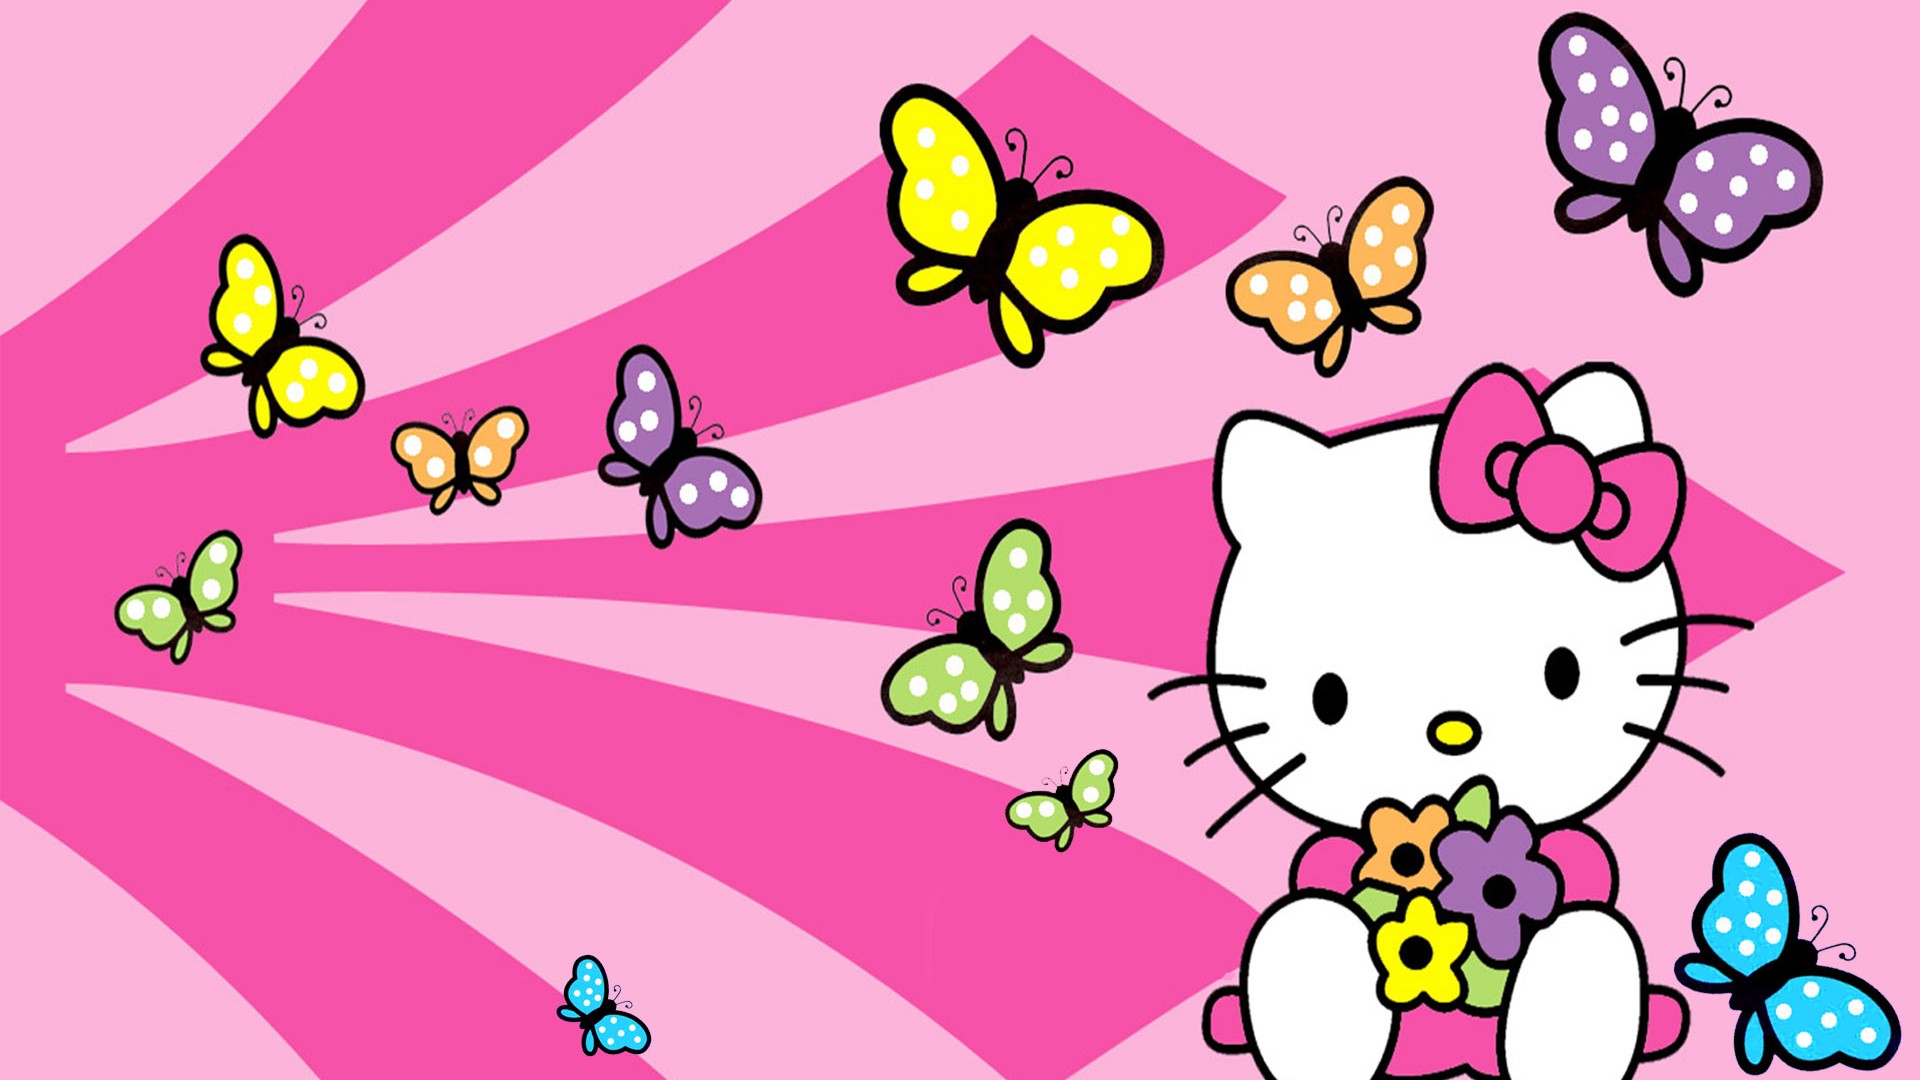 HD Wallpaper Sanrio Hello Kitty with image resolution 1920x1080 pixel. You can make this wallpaper for your Desktop Computer Backgrounds, Mac Wallpapers, Android Lock screen or iPhone Screensavers